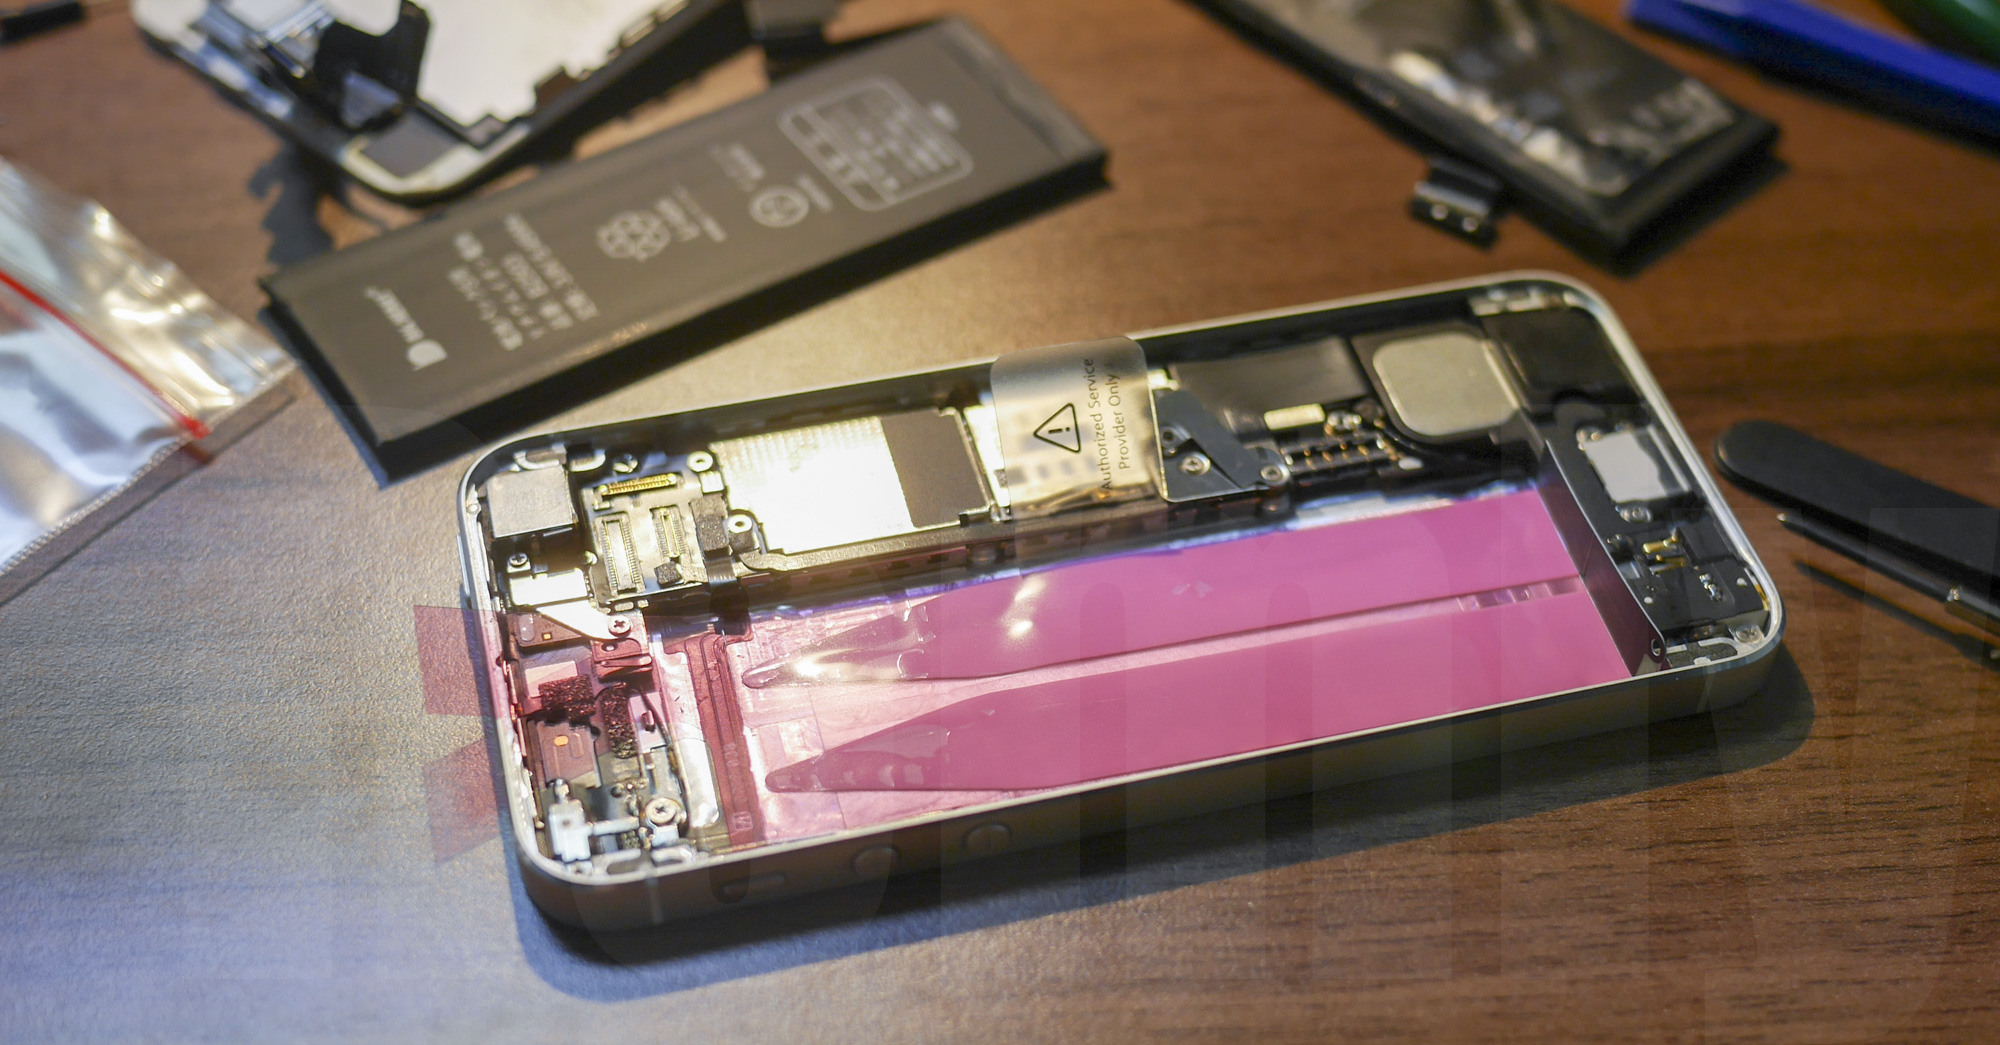 iPhone 5 Battery replacement: put the double-stick tape for new battery